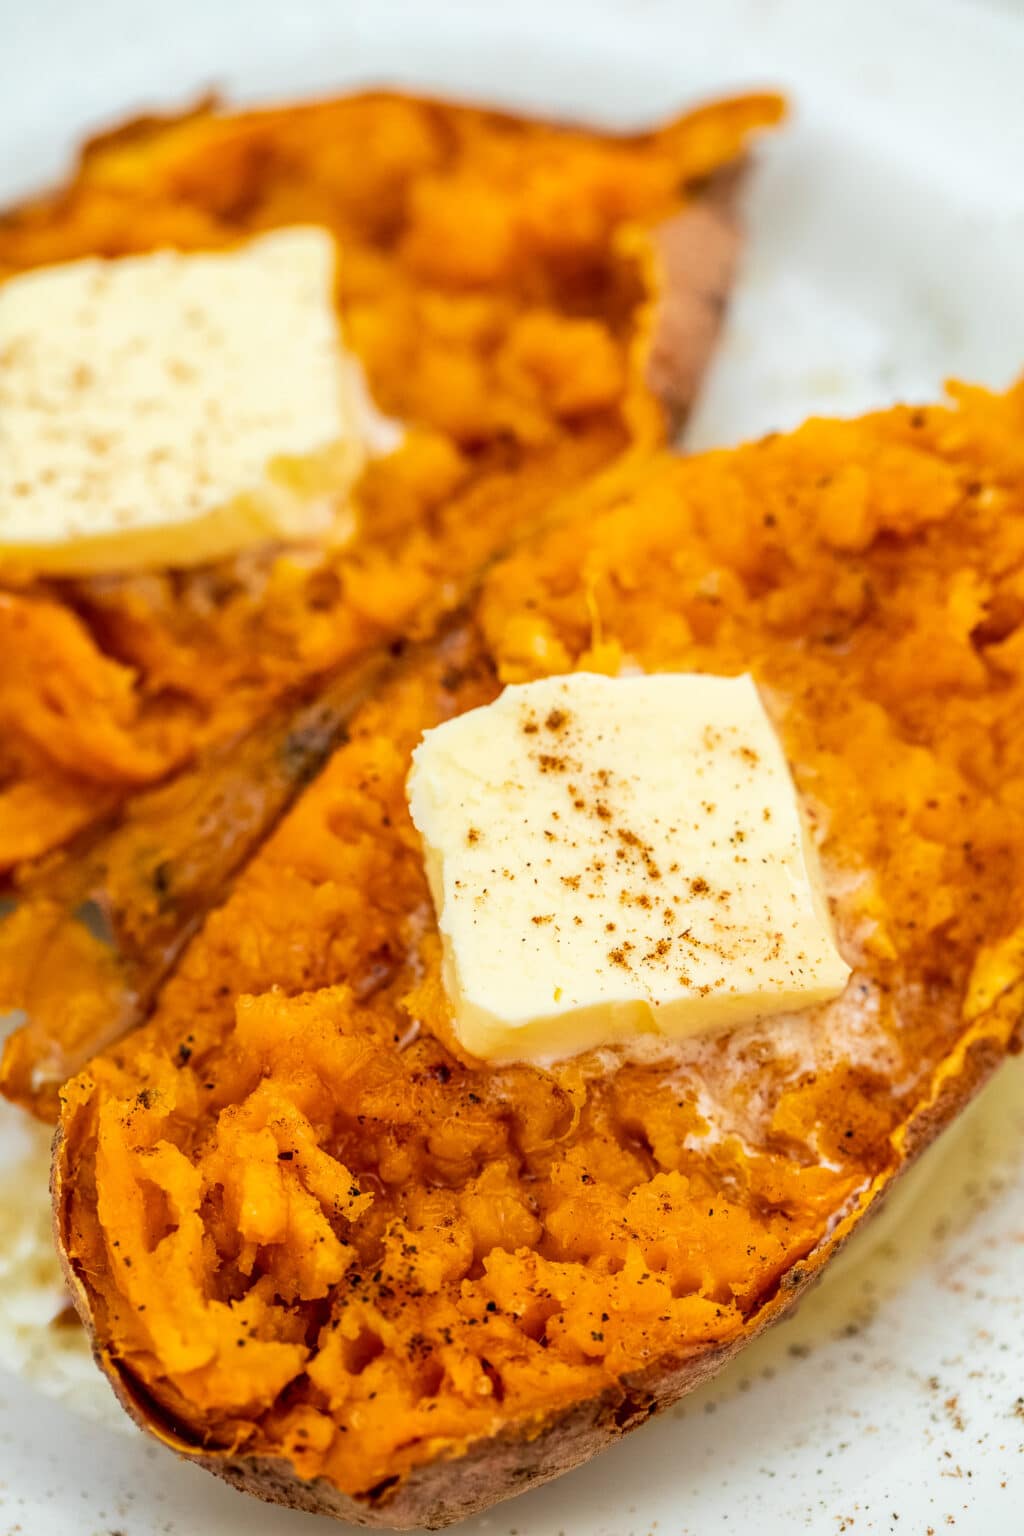 How to Microwave a Sweet Potato Recipe [Video] - S&SM